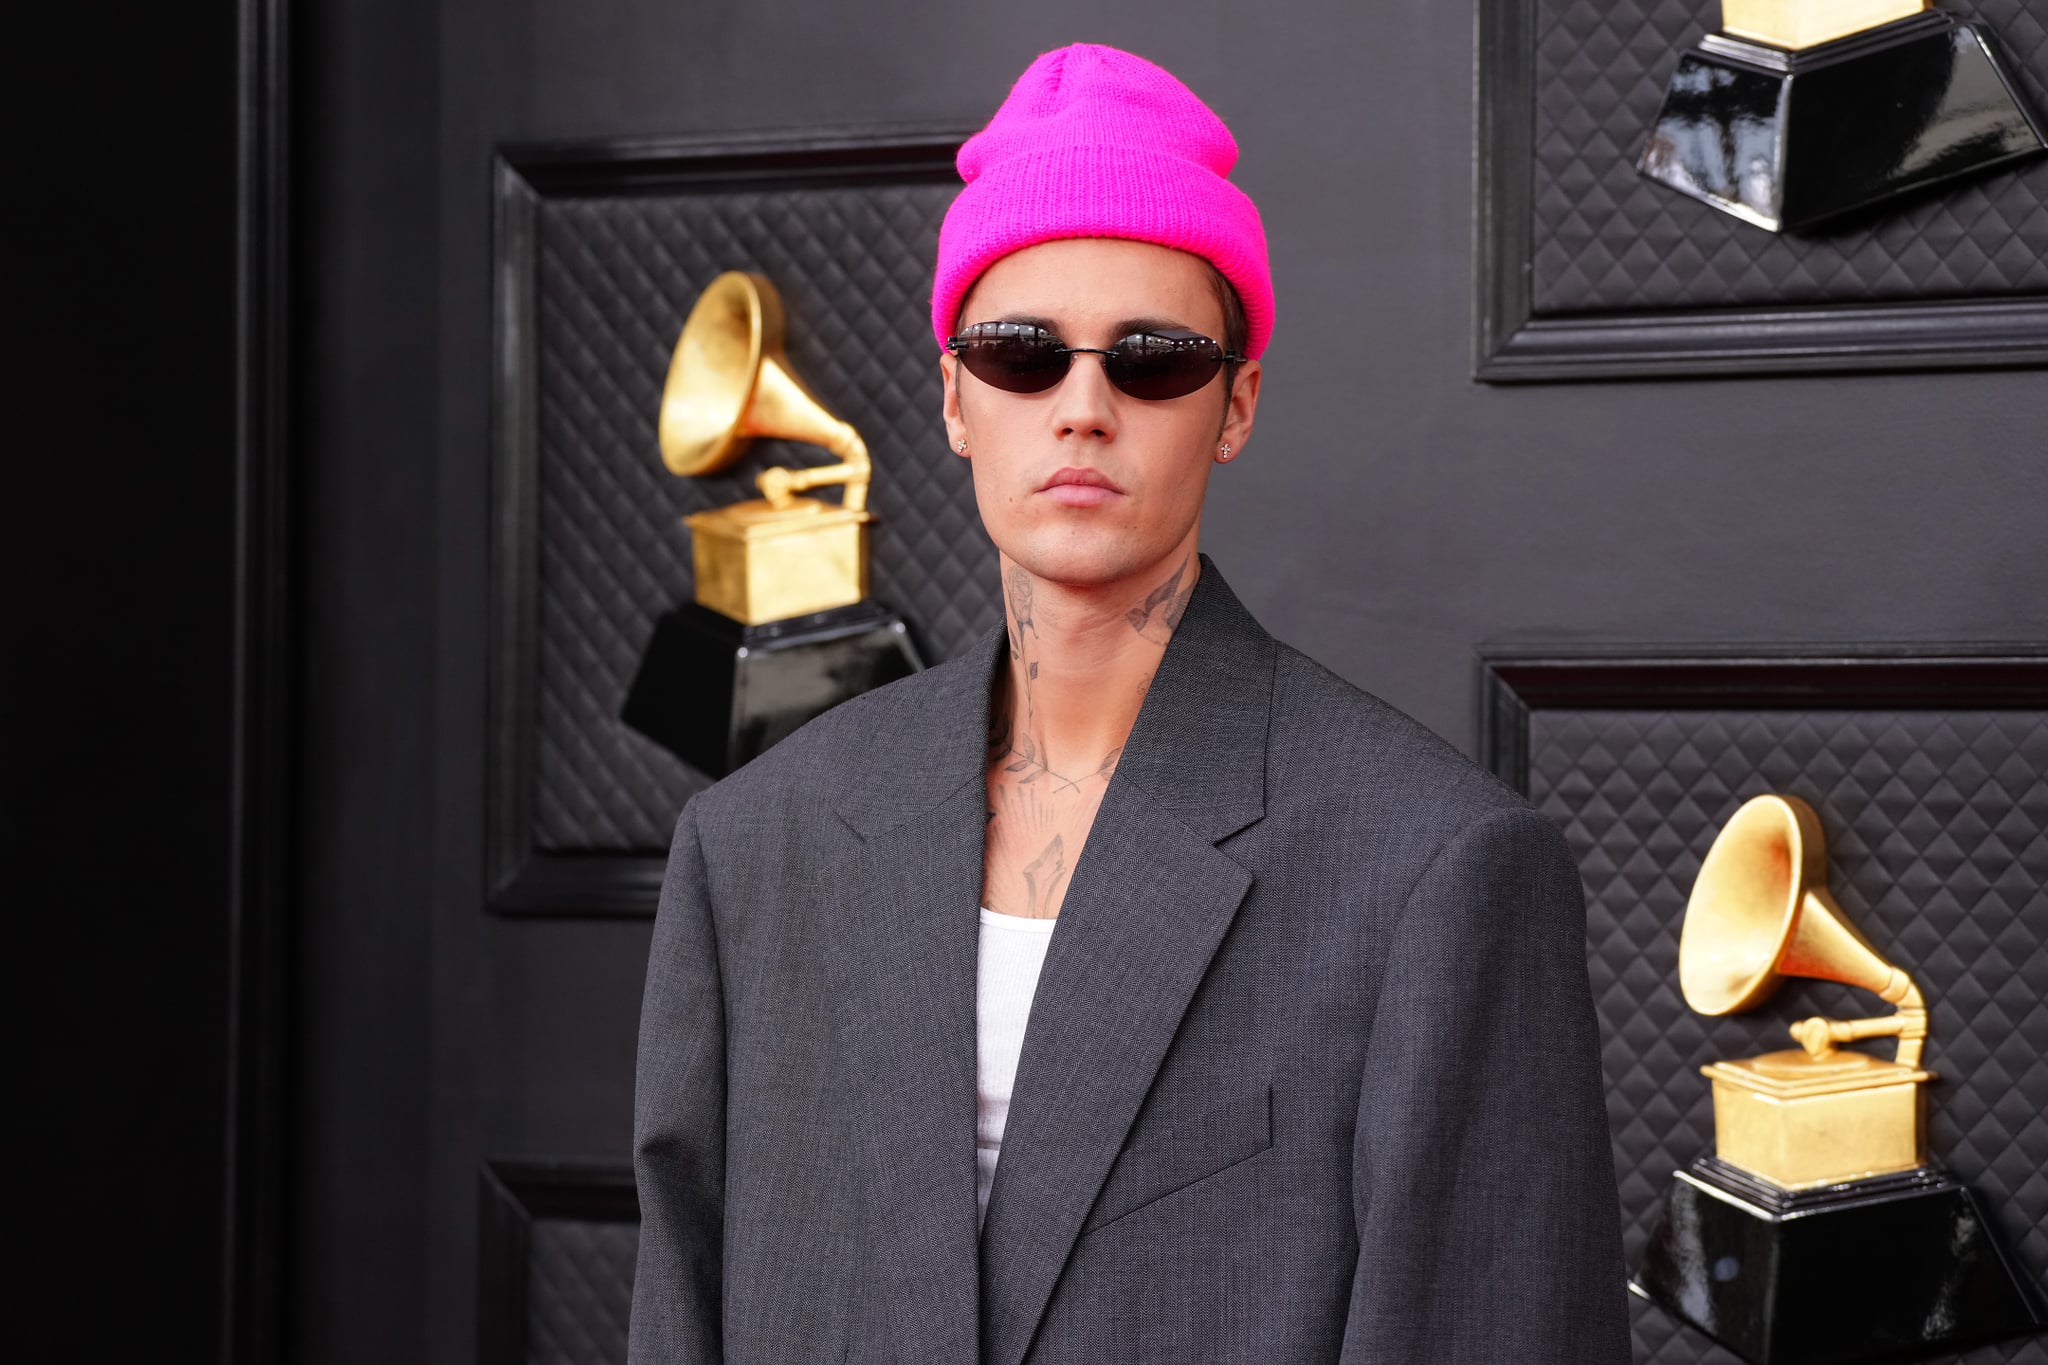 LAS VEGAS, NEVADA - APRIL 03: Justin Bieber attends the 64th Annual GRAMMY Awards at MGM Grand Garden Arena on April 03, 2022 in Las Vegas, Nevada. (Photo by Jeff Kravitz/FilmMagic)